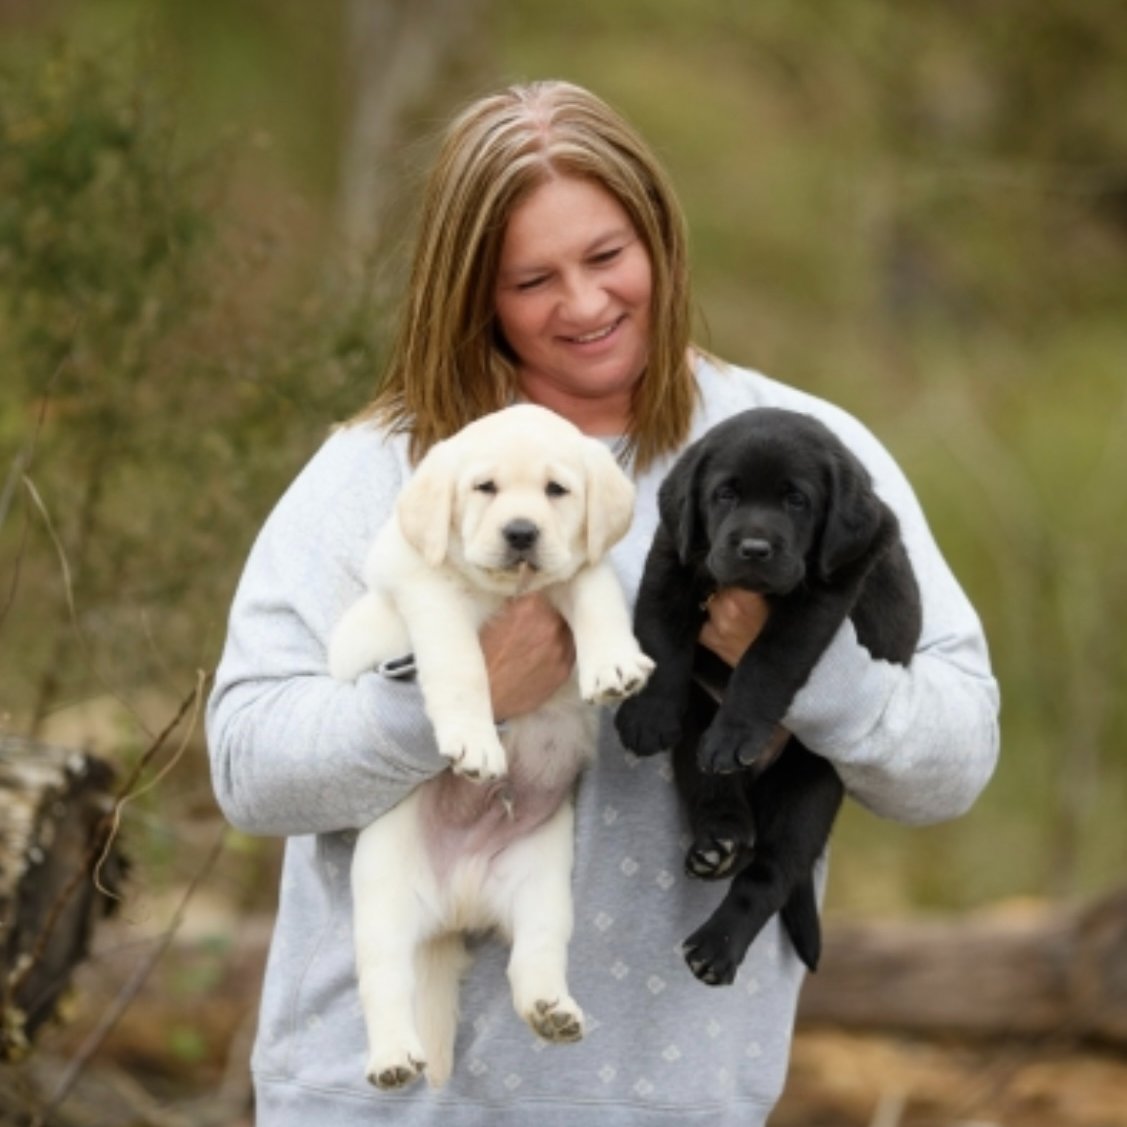 About Us - Toni Holding Labrador Puppies